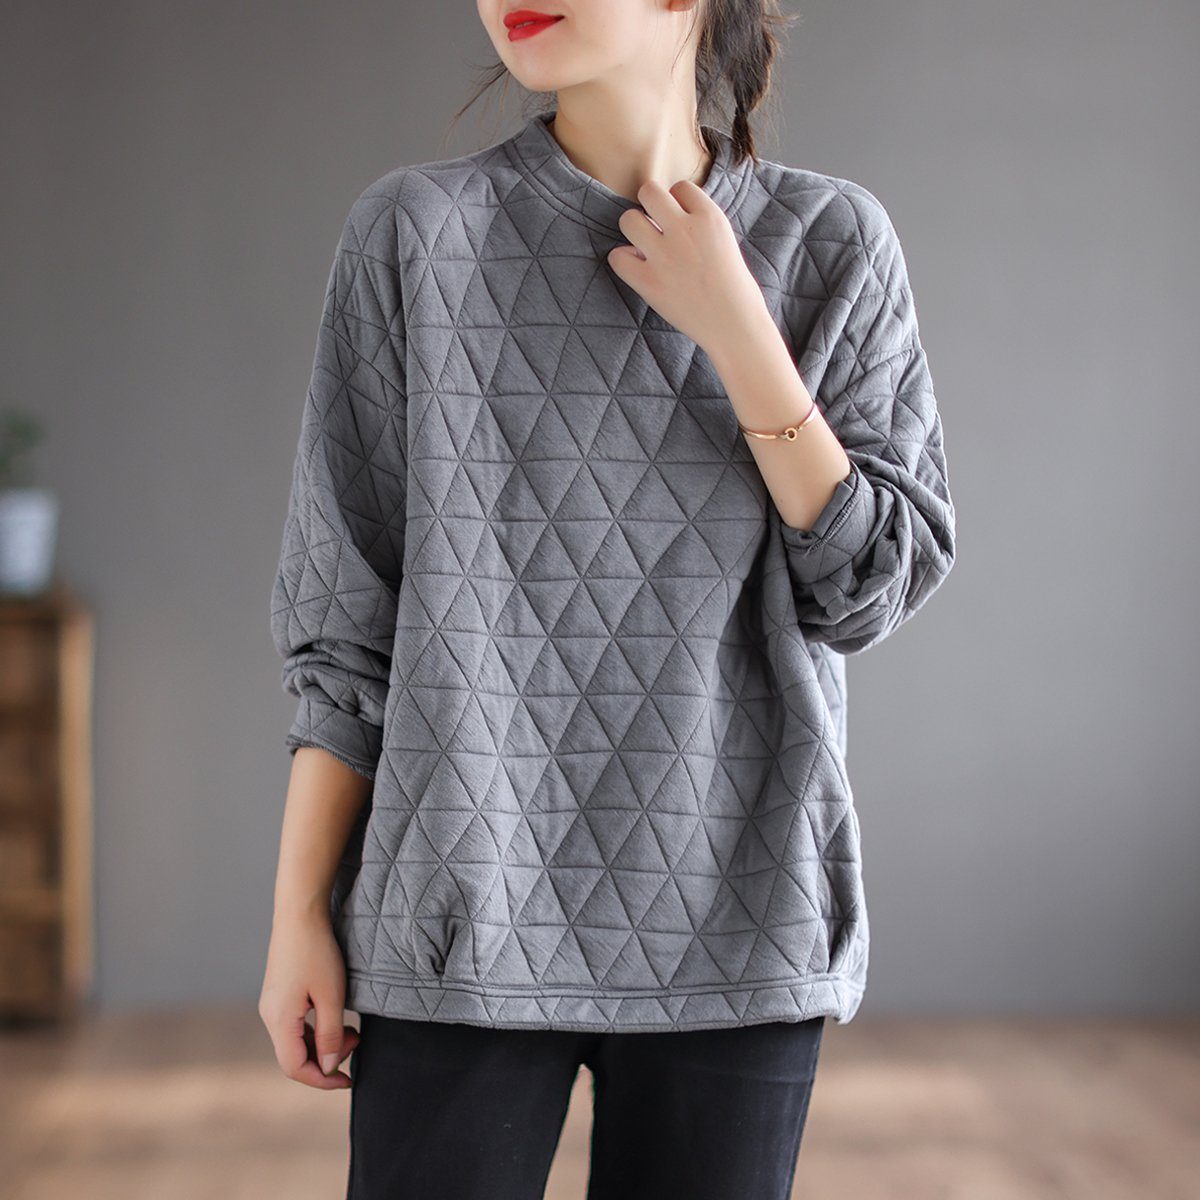 Autumn Retro Triangle Plaid Loose Cotton Sweater September 2021 new-arrival Gray 